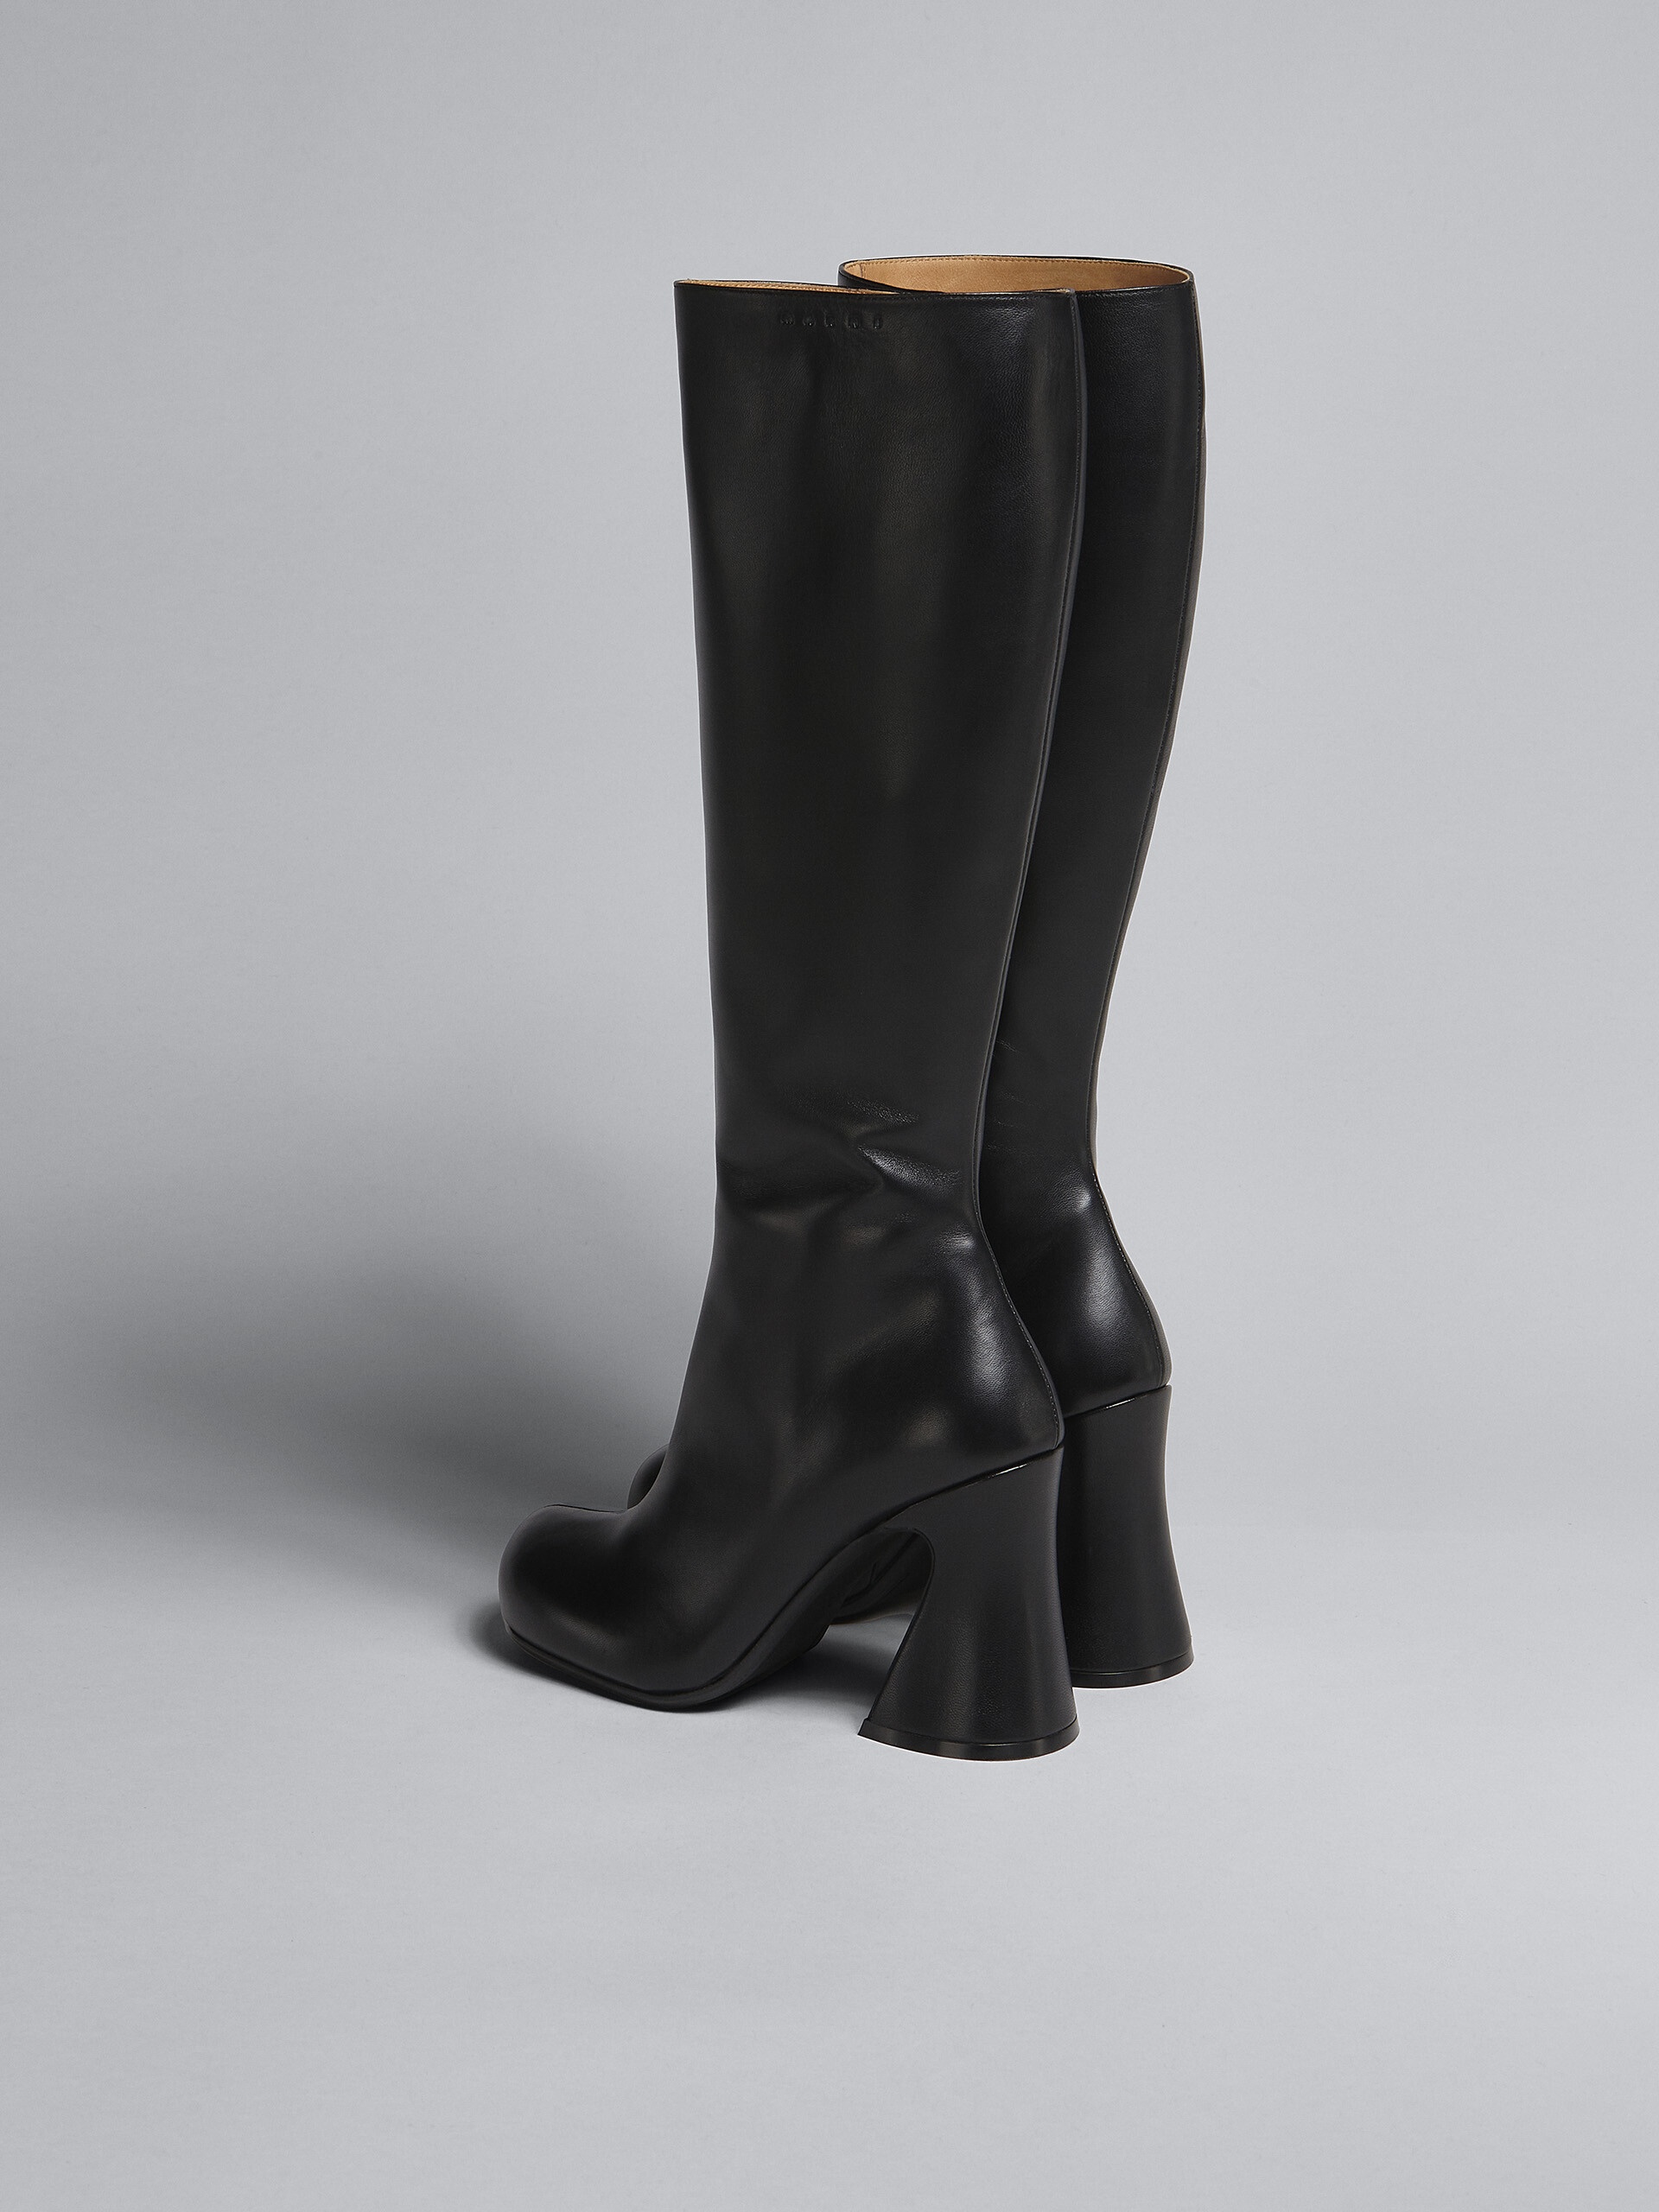 BLACK LEATHER BOOT - 3